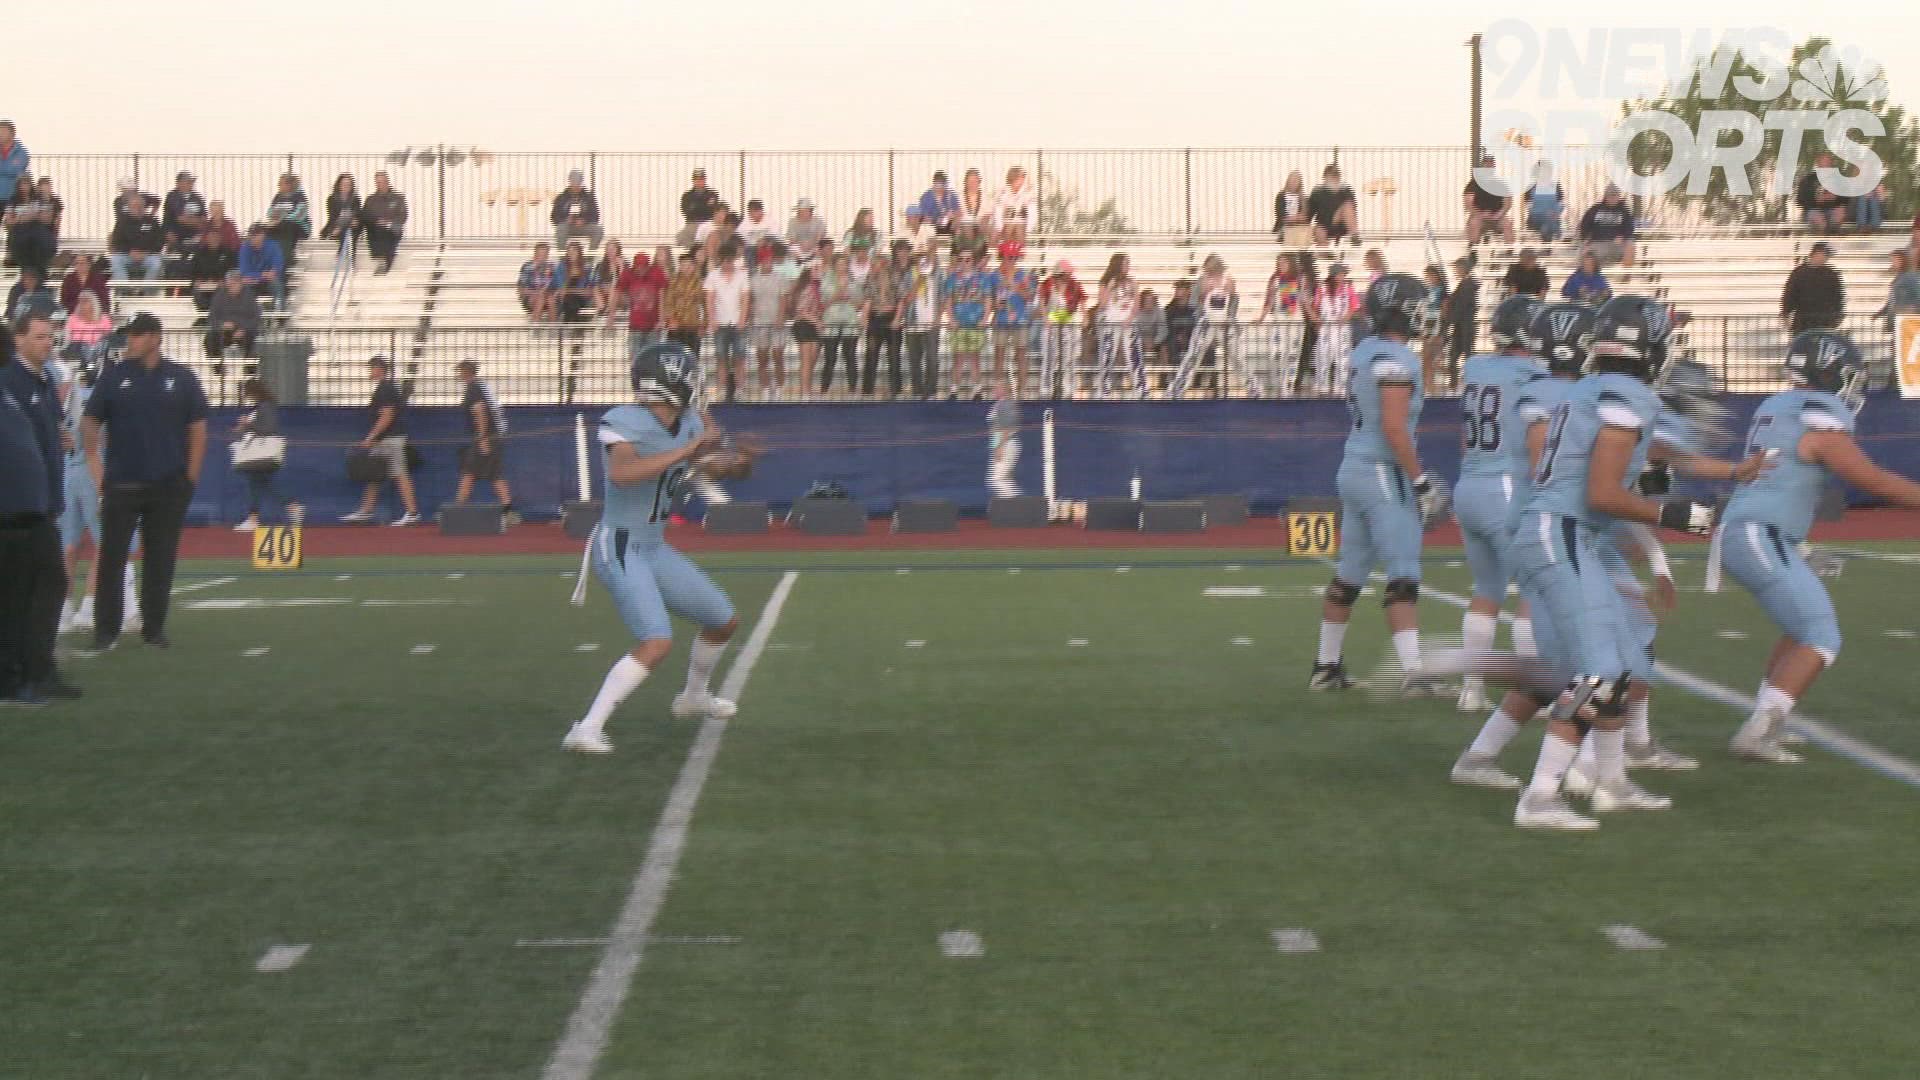 The Eagles and Rebels went back and forth on Friday night, but it was Valor Christian remaining undefeated with a 35-21 win.